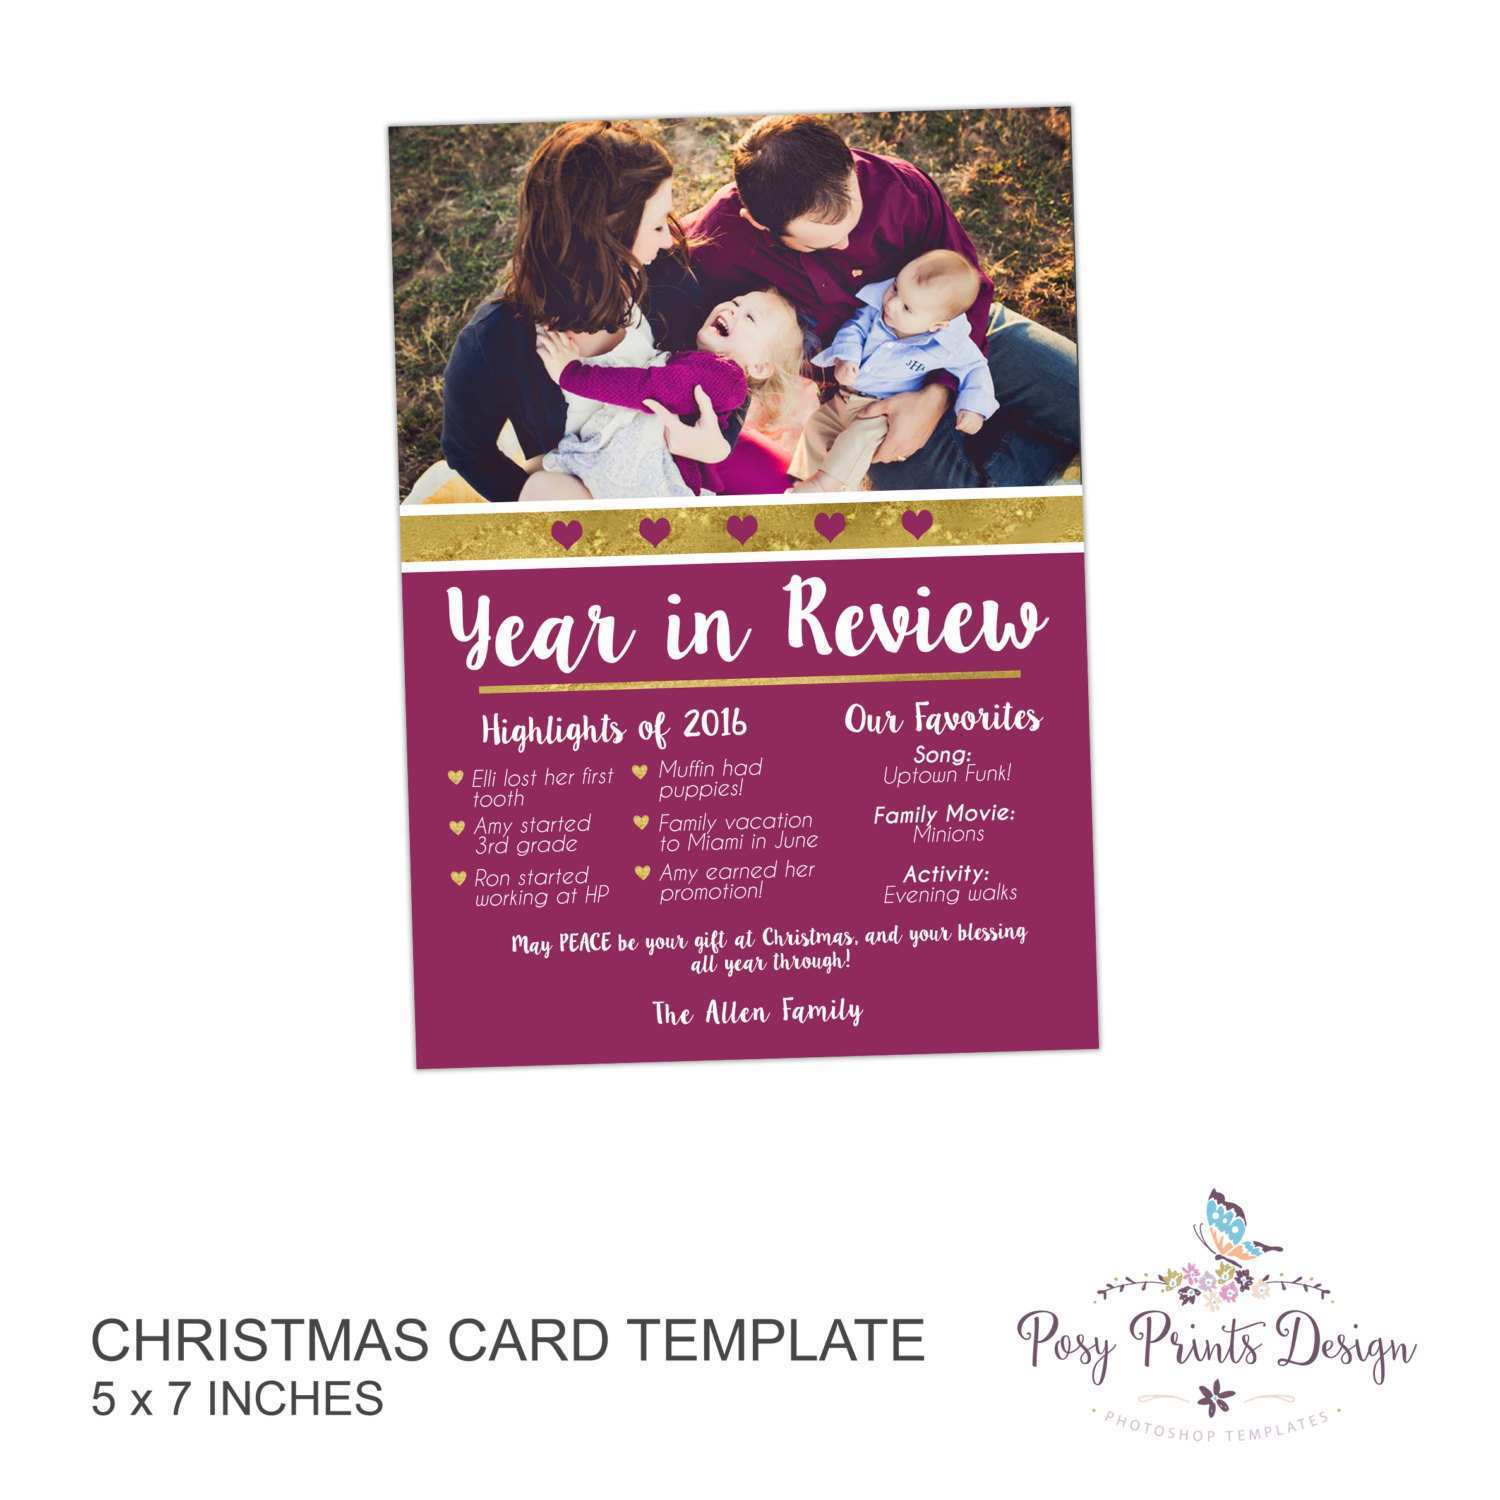 33 Customize Our Free Hp Christmas Card Templates Download with Hp Christmas Card Templates